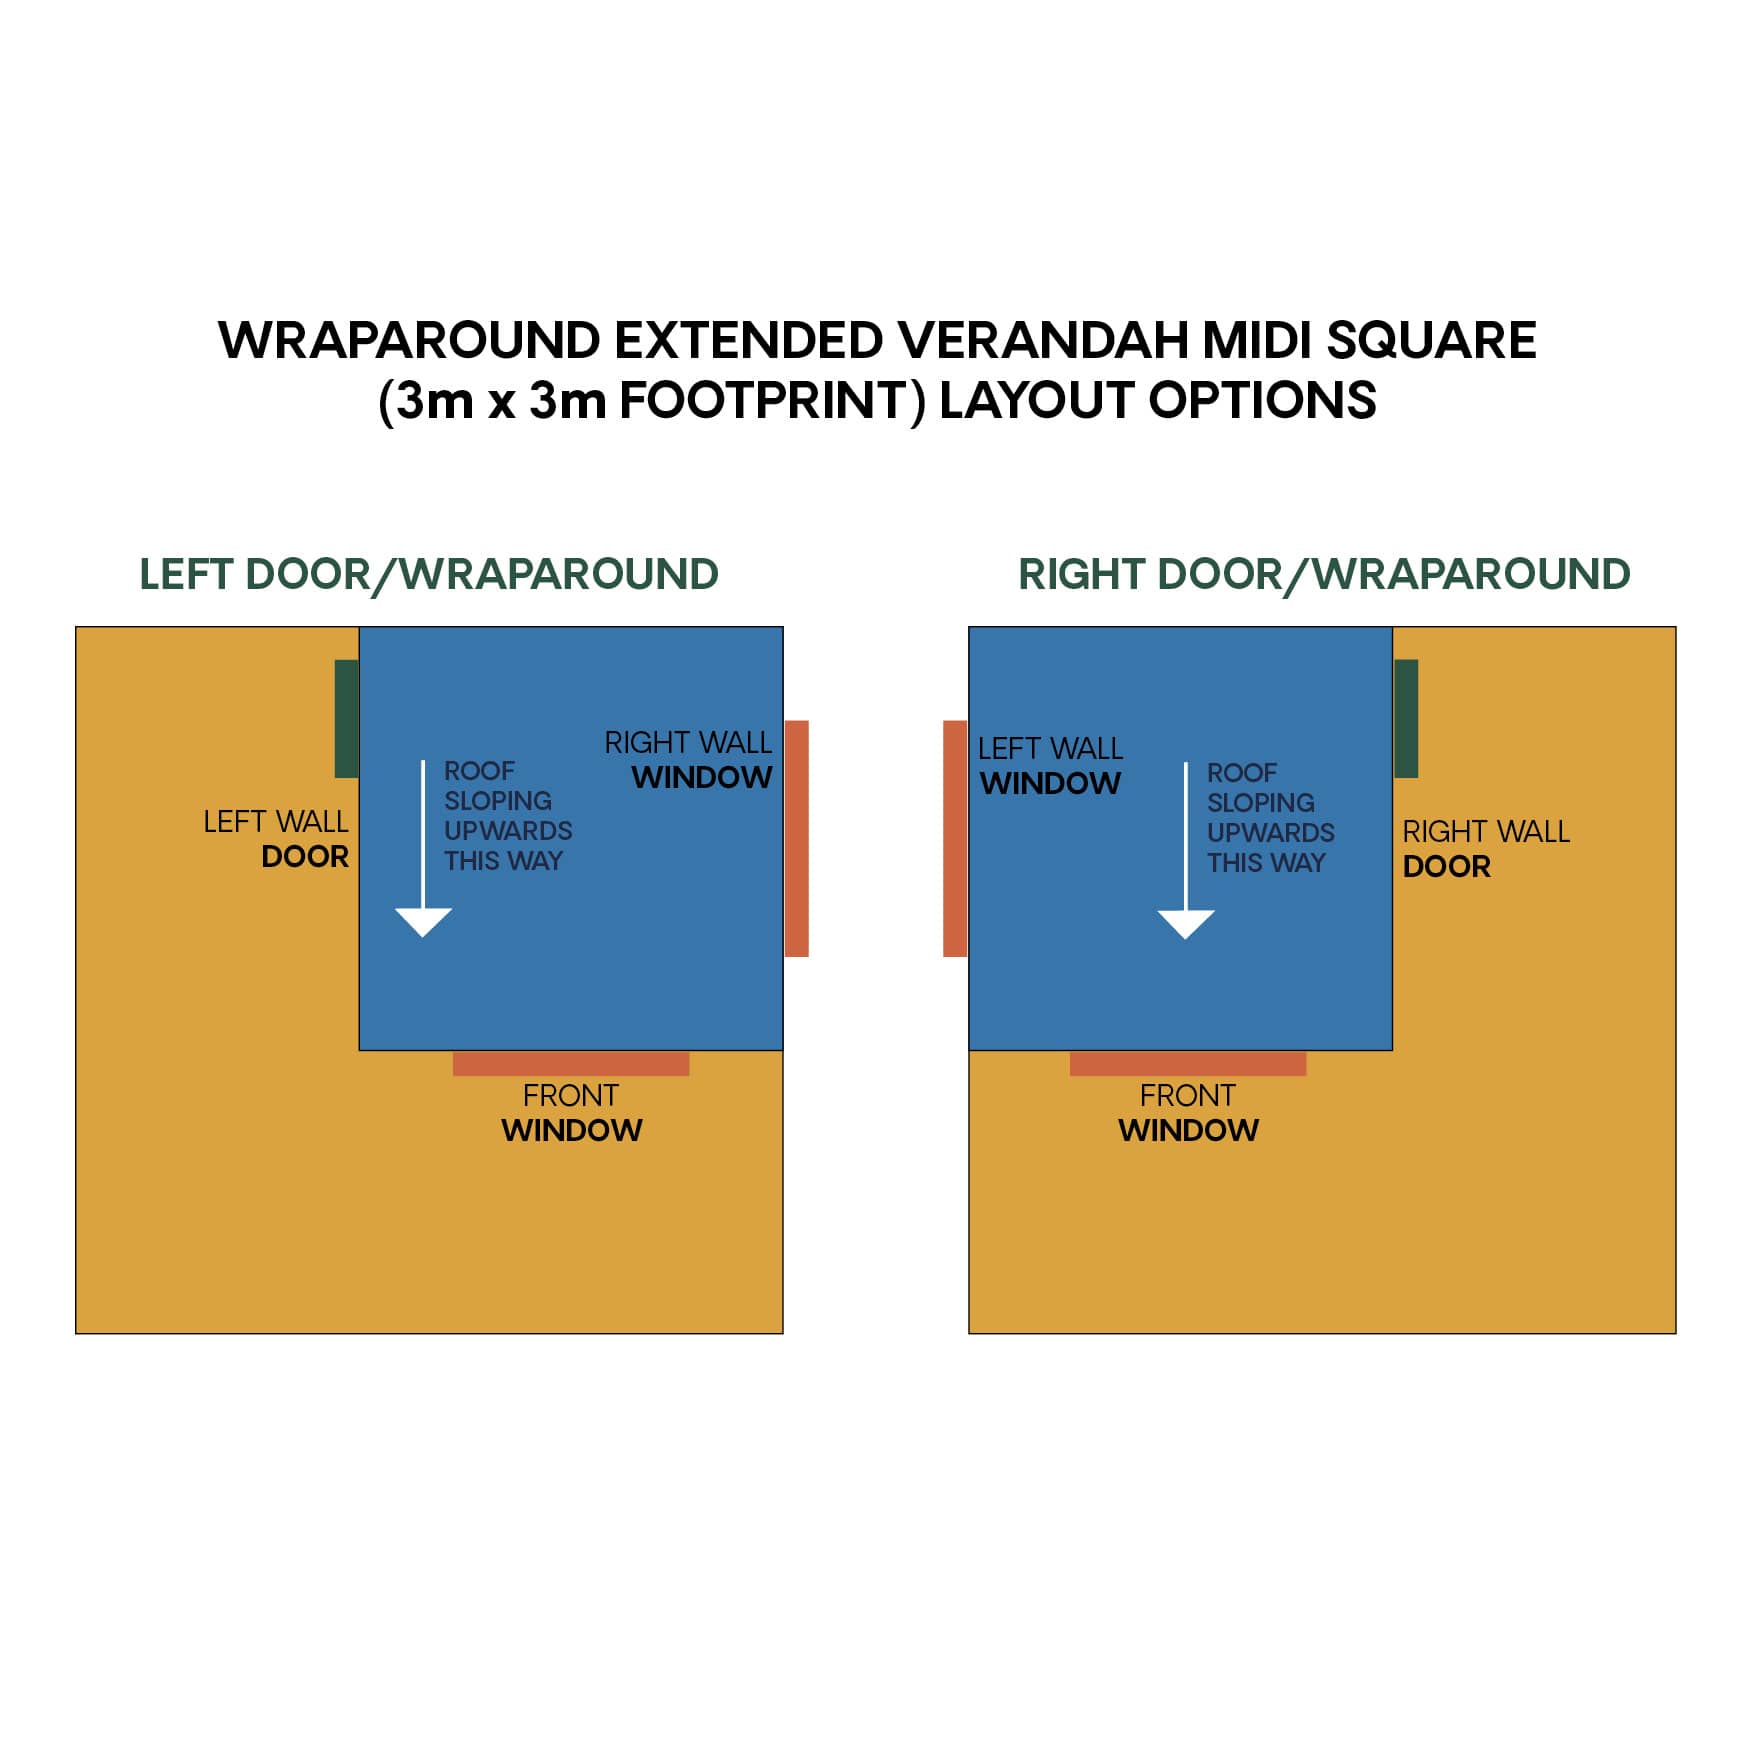 Layout options for extended height midi square cubby with wraparound verandah